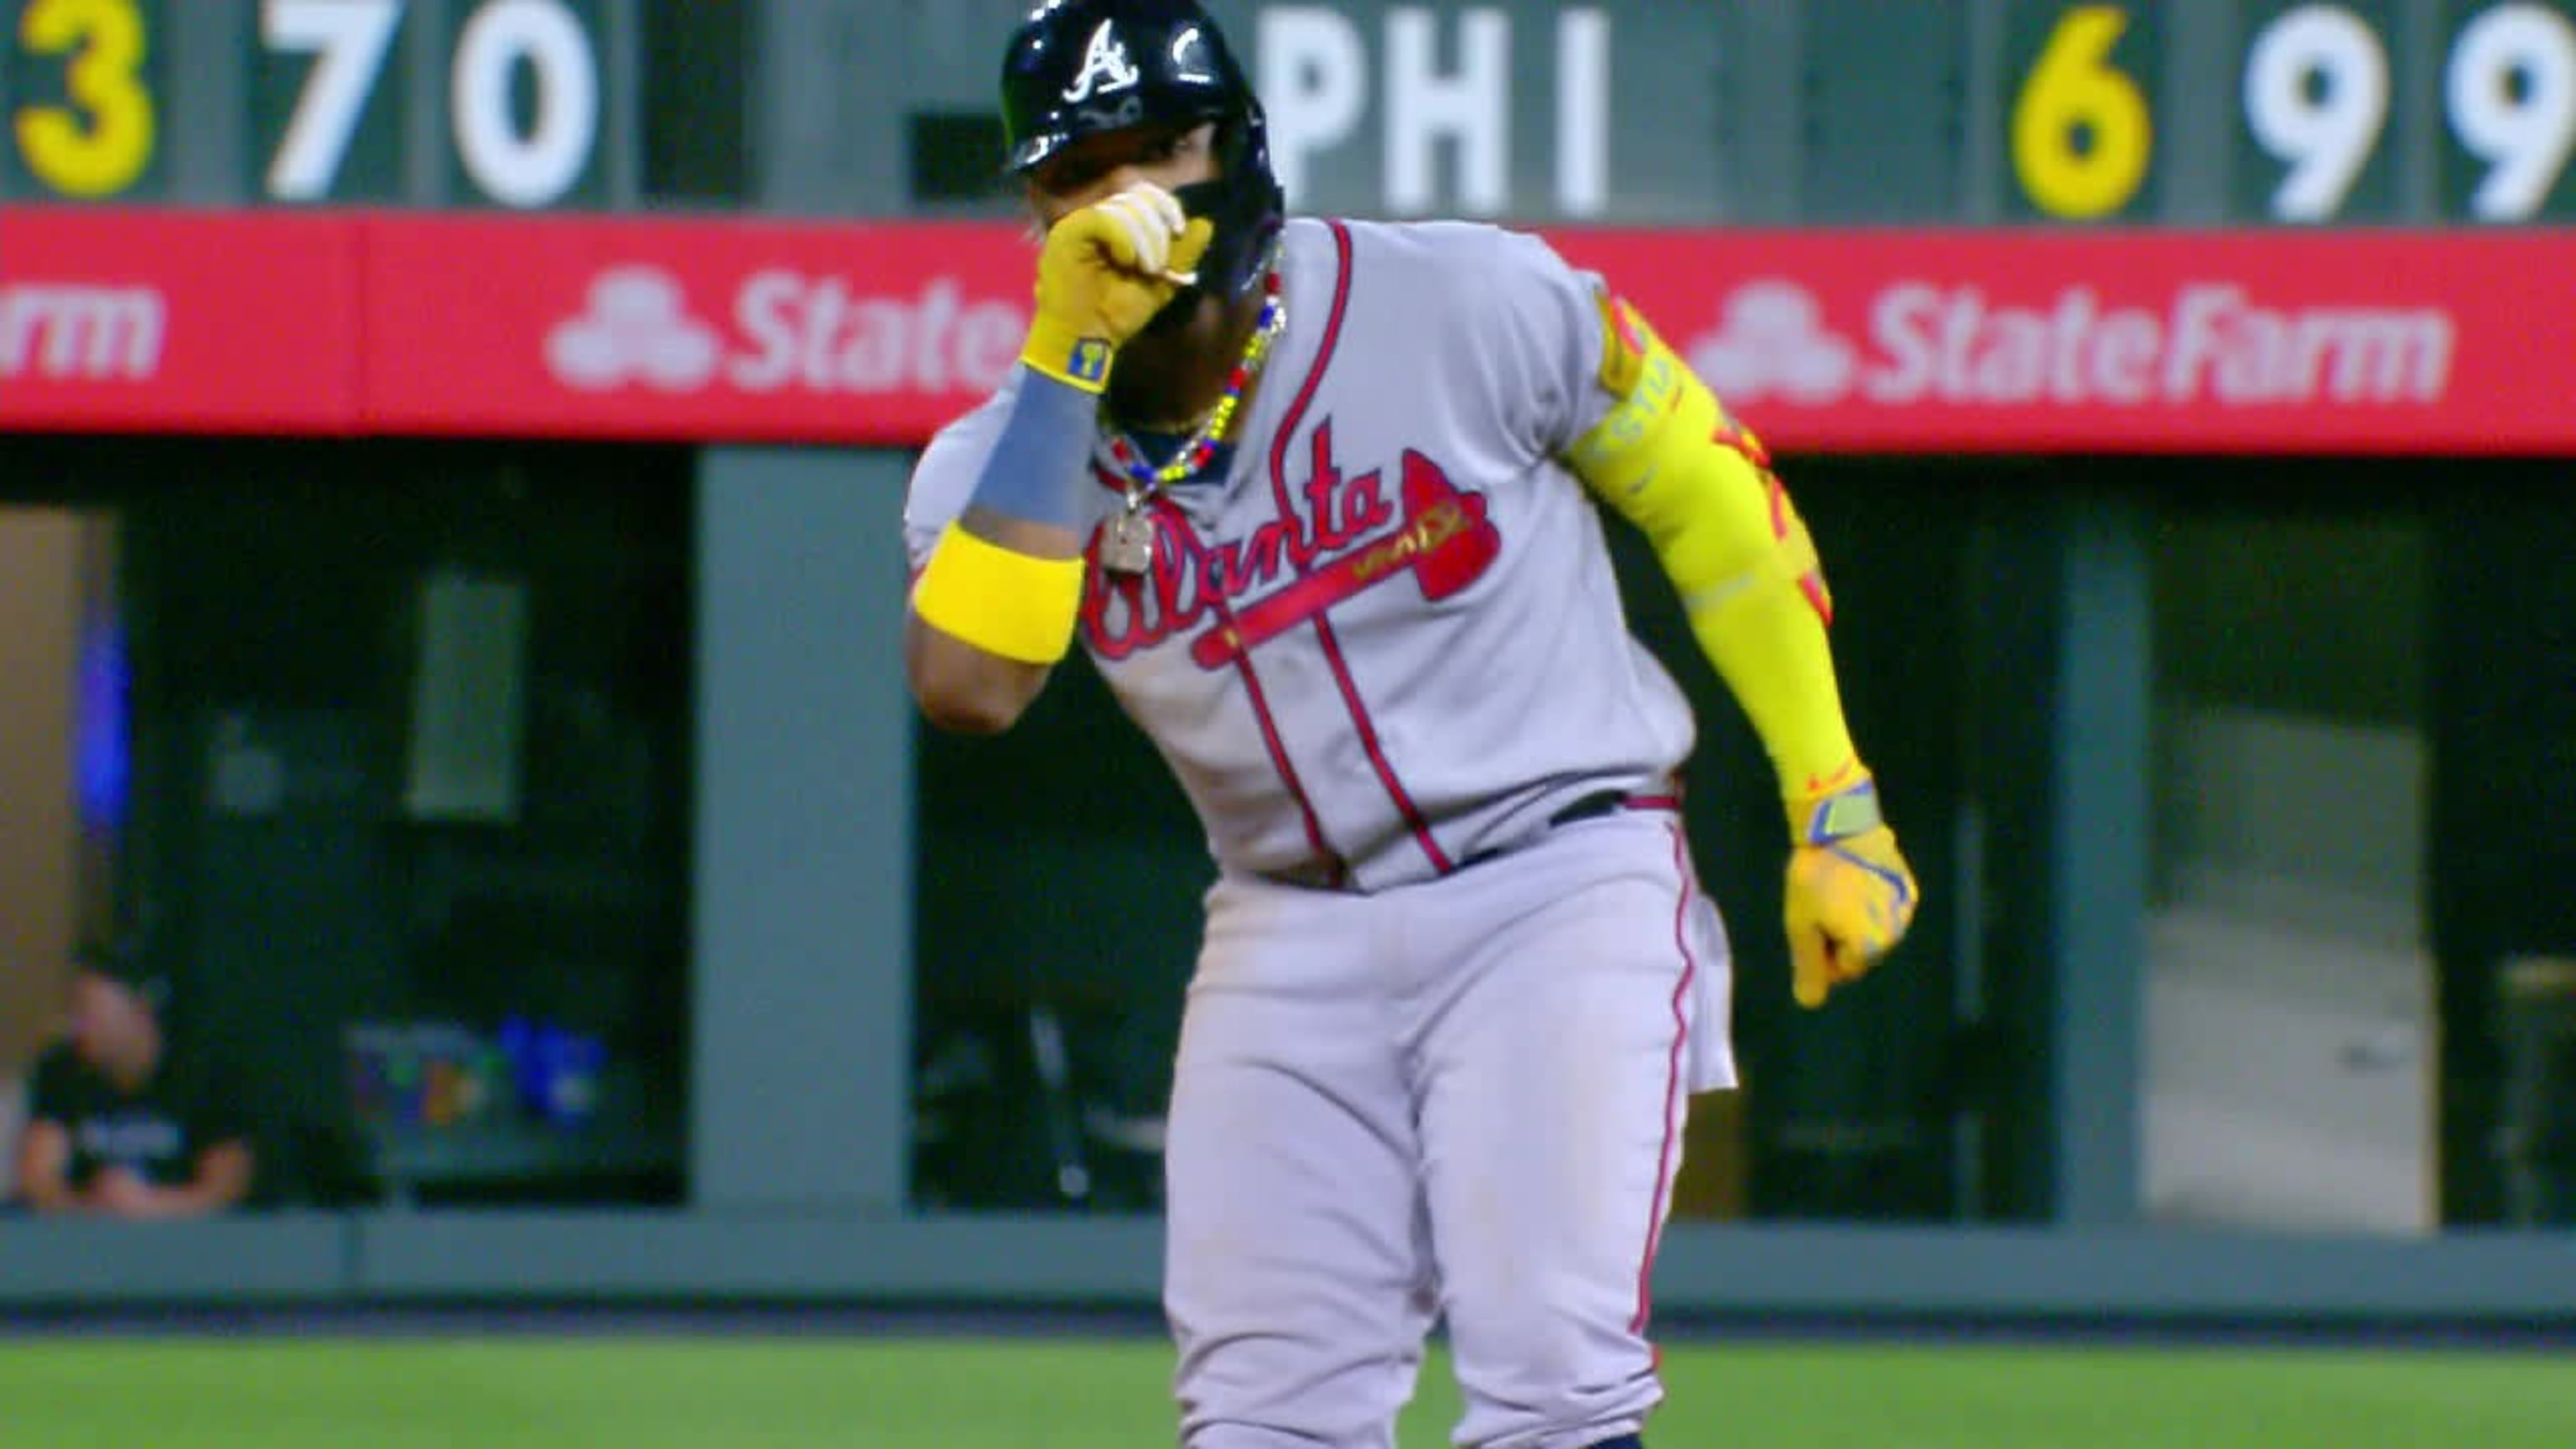 Ronald Acuna Jr. makes history with 30 homers, 60 steals